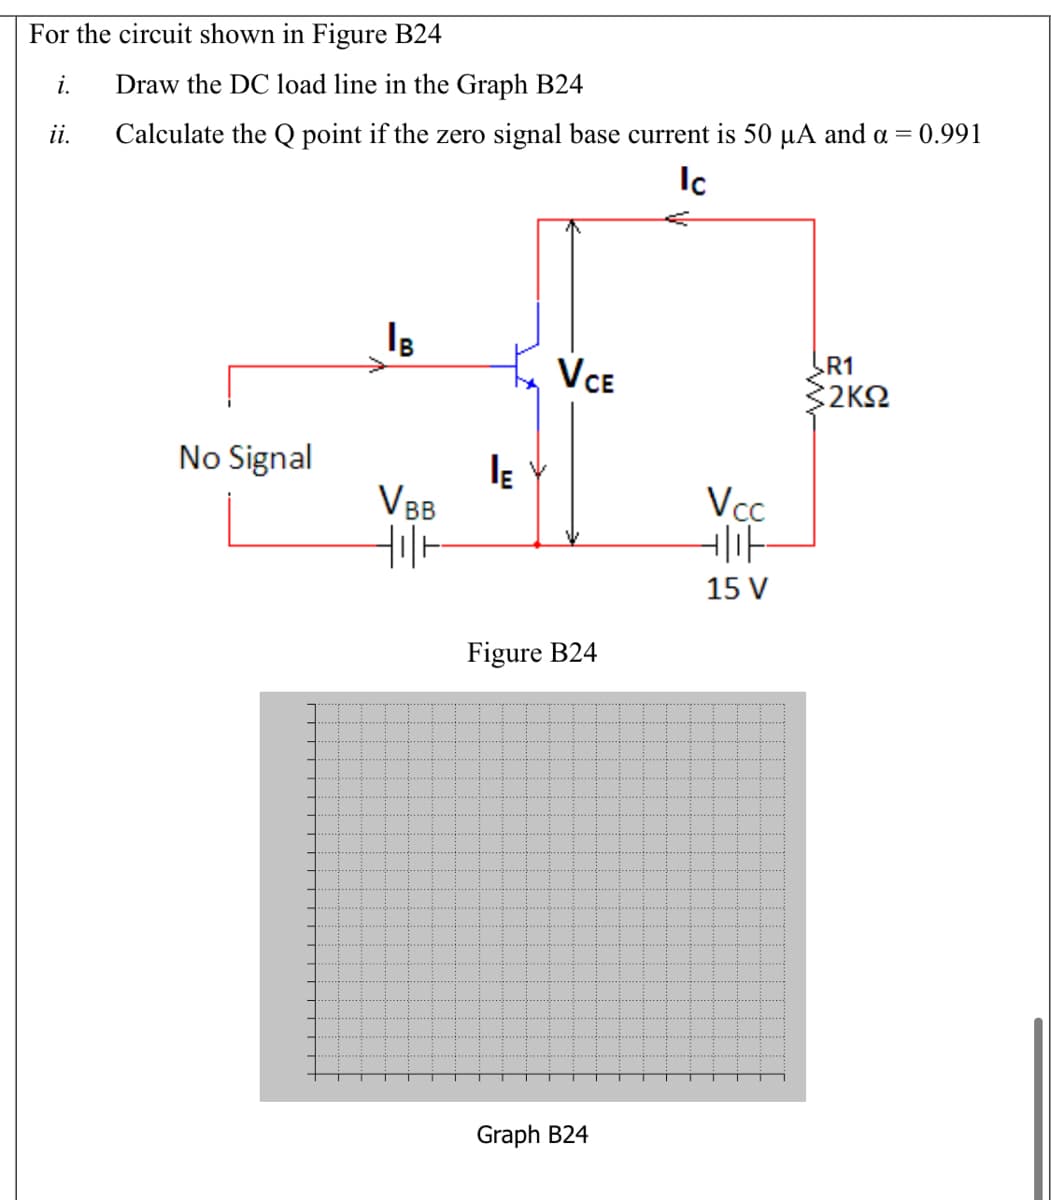 For the circuit shown in Figure B24
i.
Draw the DC load line in the Graph B24
ii.
Calculate the Q point if the zero signal base current is 50 µA and a = 0.991
Ic
VCE
R1
32K2
No Signal
VBB
Vcc
15 V
Figure B24
Graph B24
